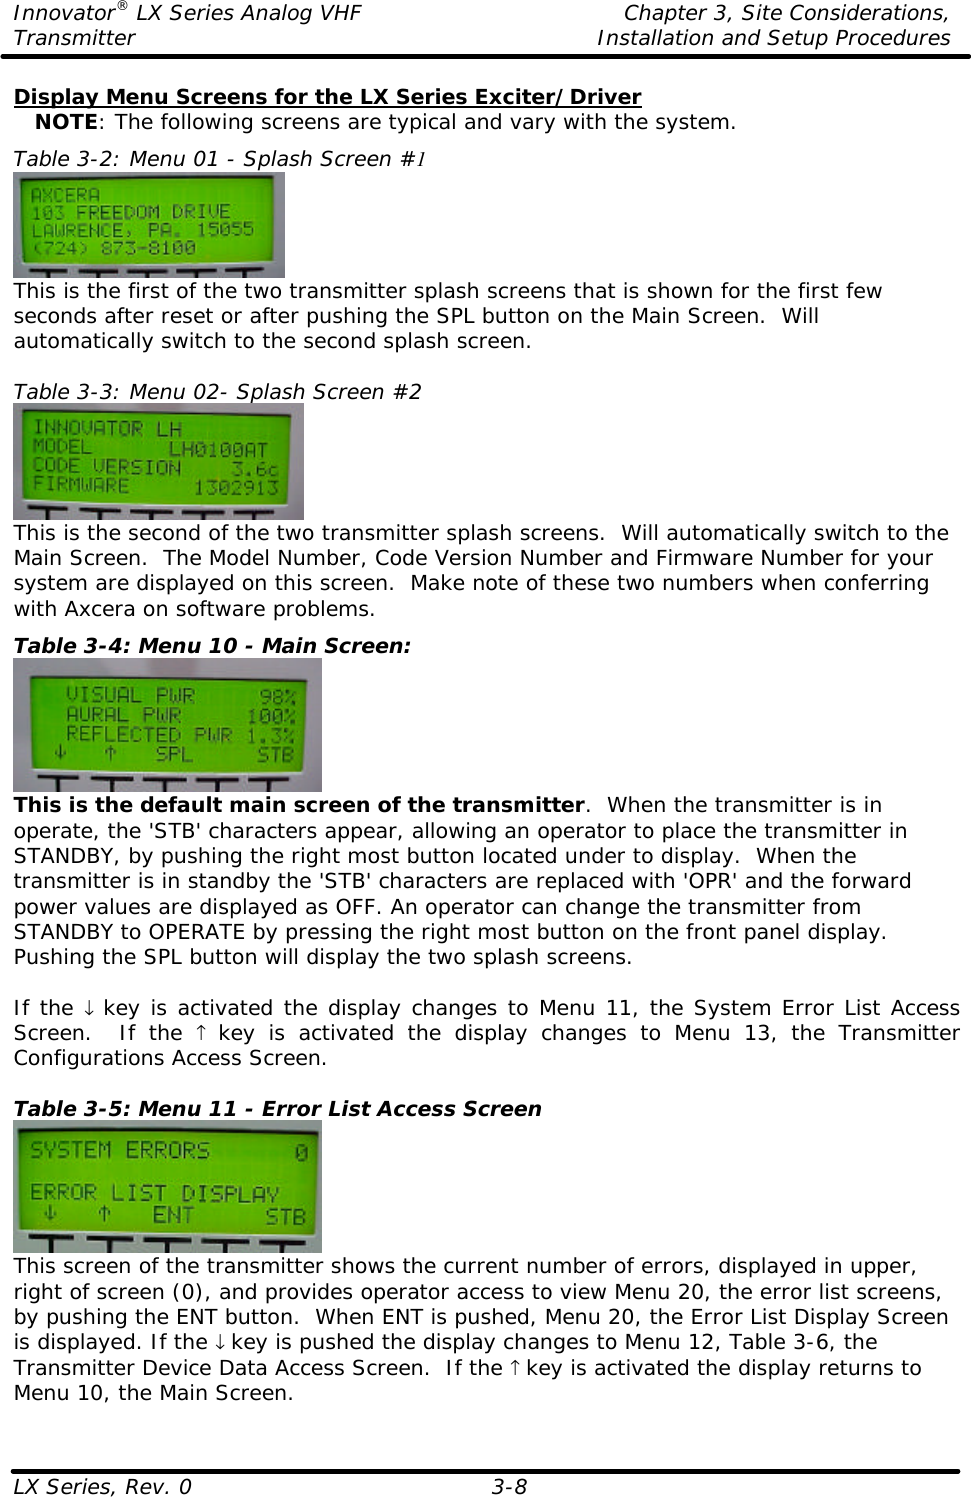 Innovator® LX Series Analog VHF    Chapter 3, Site Considerations, Transmitter Installation and Setup Procedures LX Series, Rev. 0  3-8 Display Menu Screens for the LX Series Exciter/Driver    NOTE: The following screens are typical and vary with the system. Table 3-2: Menu 01 - Splash Screen #1  This is the first of the two transmitter splash screens that is shown for the first few seconds after reset or after pushing the SPL button on the Main Screen.  Will automatically switch to the second splash screen.  Table 3-3: Menu 02- Splash Screen #2  This is the second of the two transmitter splash screens.  Will automatically switch to the Main Screen.  The Model Number, Code Version Number and Firmware Number for your system are displayed on this screen.  Make note of these two numbers when conferring with Axcera on software problems. Table 3-4: Menu 10 - Main Screen:  This is the default main screen of the transmitter.  When the transmitter is in operate, the &apos;STB&apos; characters appear, allowing an operator to place the transmitter in STANDBY, by pushing the right most button located under to display.  When the transmitter is in standby the &apos;STB&apos; characters are replaced with &apos;OPR&apos; and the forward power values are displayed as OFF. An operator can change the transmitter from STANDBY to OPERATE by pressing the right most button on the front panel display.  Pushing the SPL button will display the two splash screens.  If the ↓ key is activated the display changes to Menu 11, the System Error List Access Screen.  If the ↑ key is activated the display changes to Menu 13, the Transmitter Configurations Access Screen.  Table 3-5: Menu 11 - Error List Access Screen  This screen of the transmitter shows the current number of errors, displayed in upper, right of screen (0), and provides operator access to view Menu 20, the error list screens, by pushing the ENT button.  When ENT is pushed, Menu 20, the Error List Display Screen is displayed. If the ↓ key is pushed the display changes to Menu 12, Table 3-6, the Transmitter Device Data Access Screen.  If the ↑ key is activated the display returns to Menu 10, the Main Screen.  